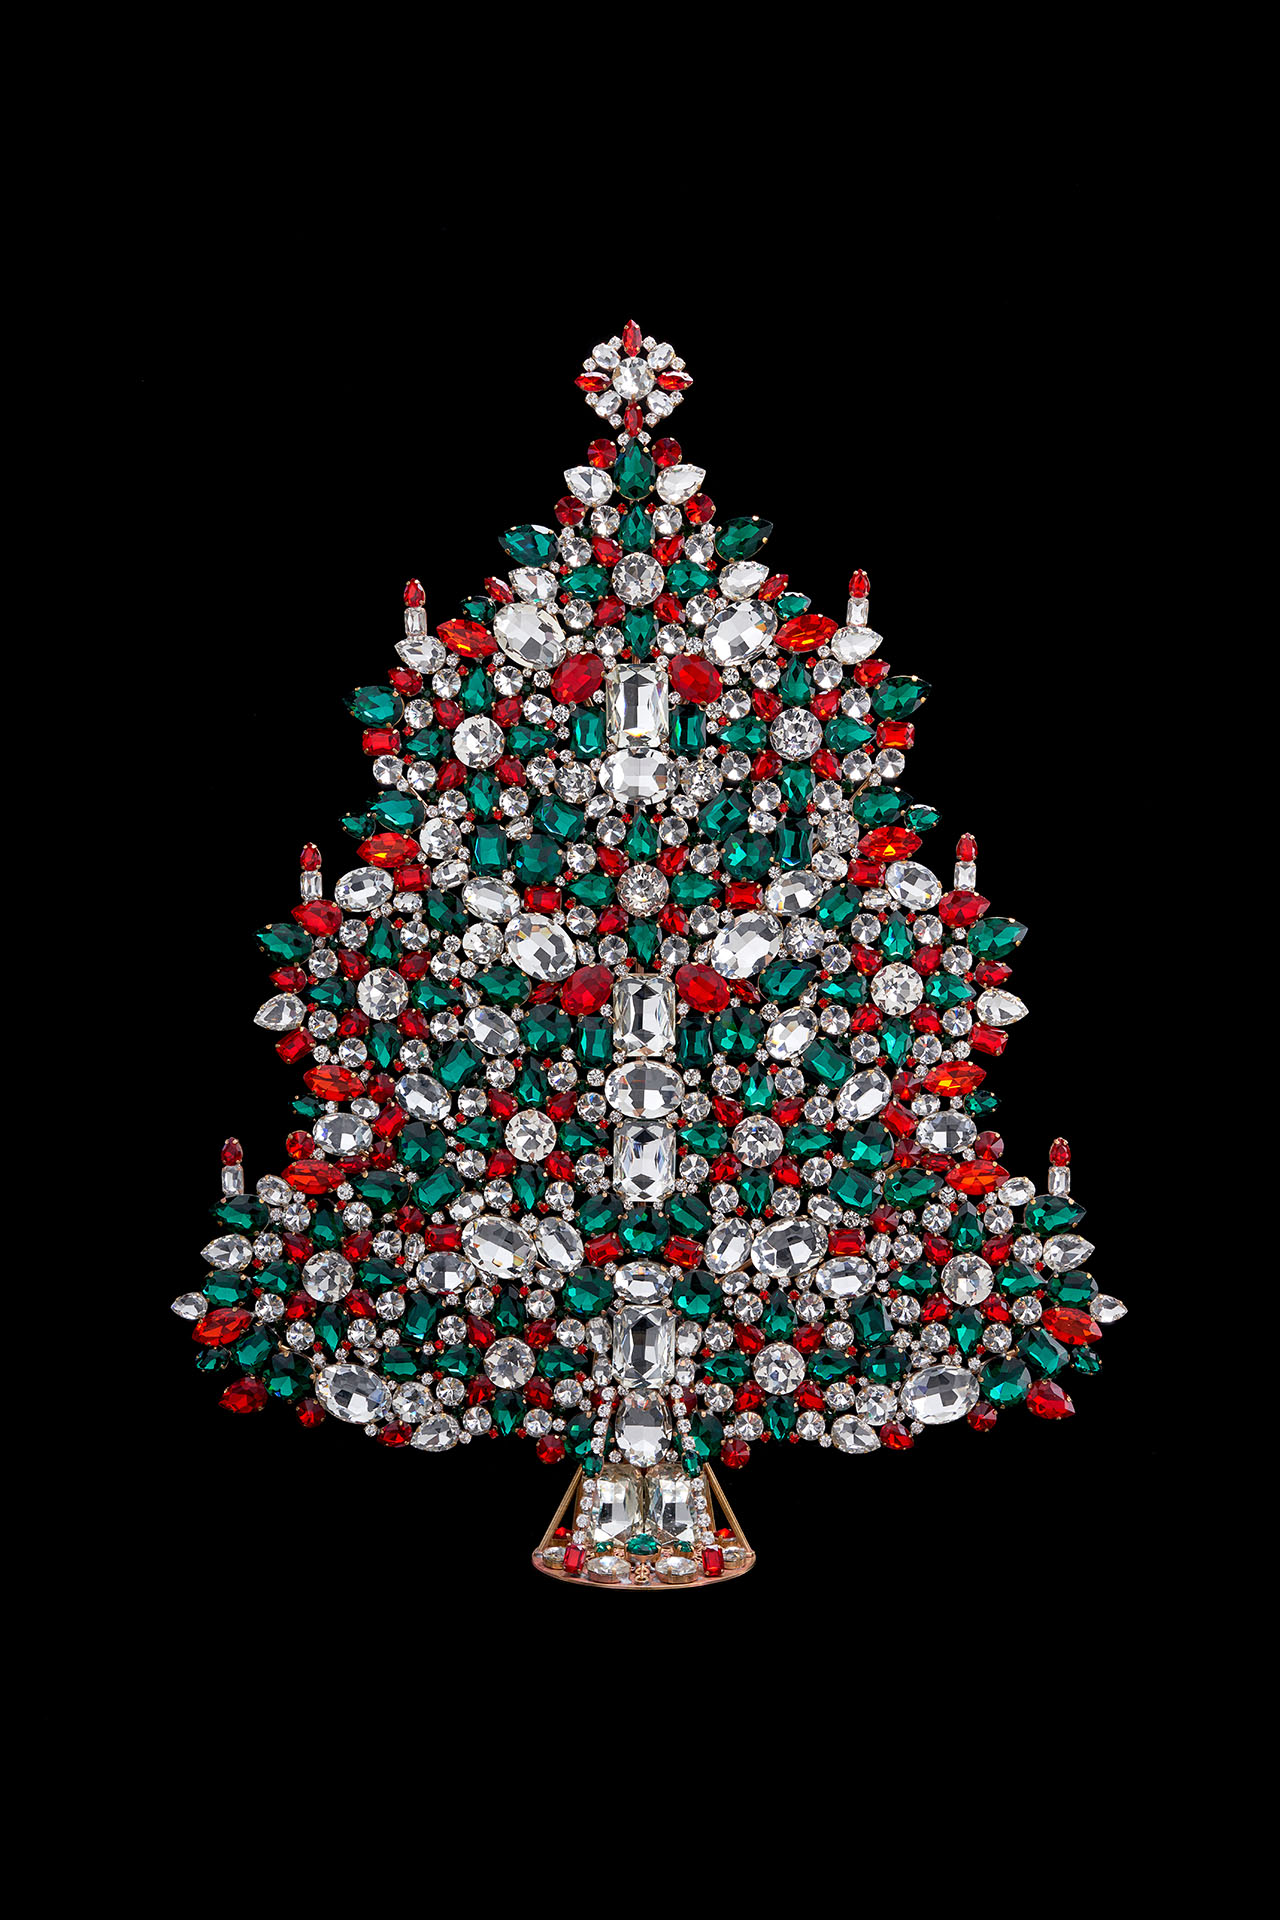 Bountiful Christmas Tree, handcrafted with tree decorations